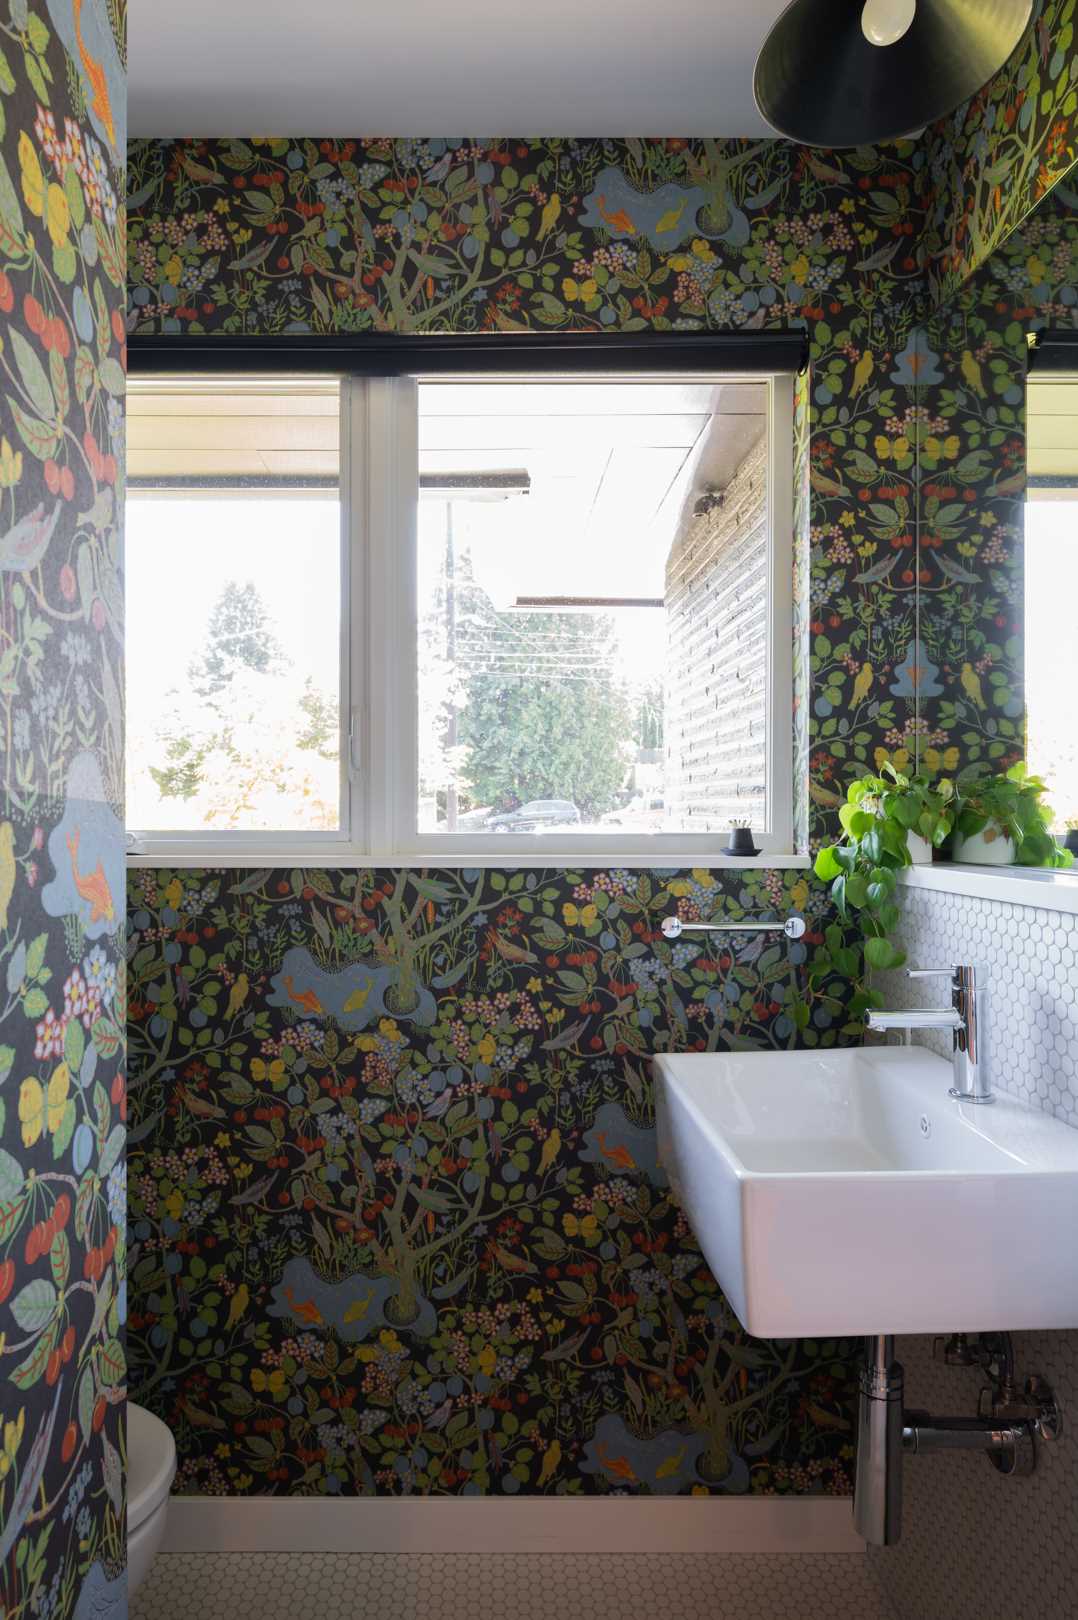 A botanical wallpaper adorns the walls in this powder room, creating an unexpected pop of color in the small space.